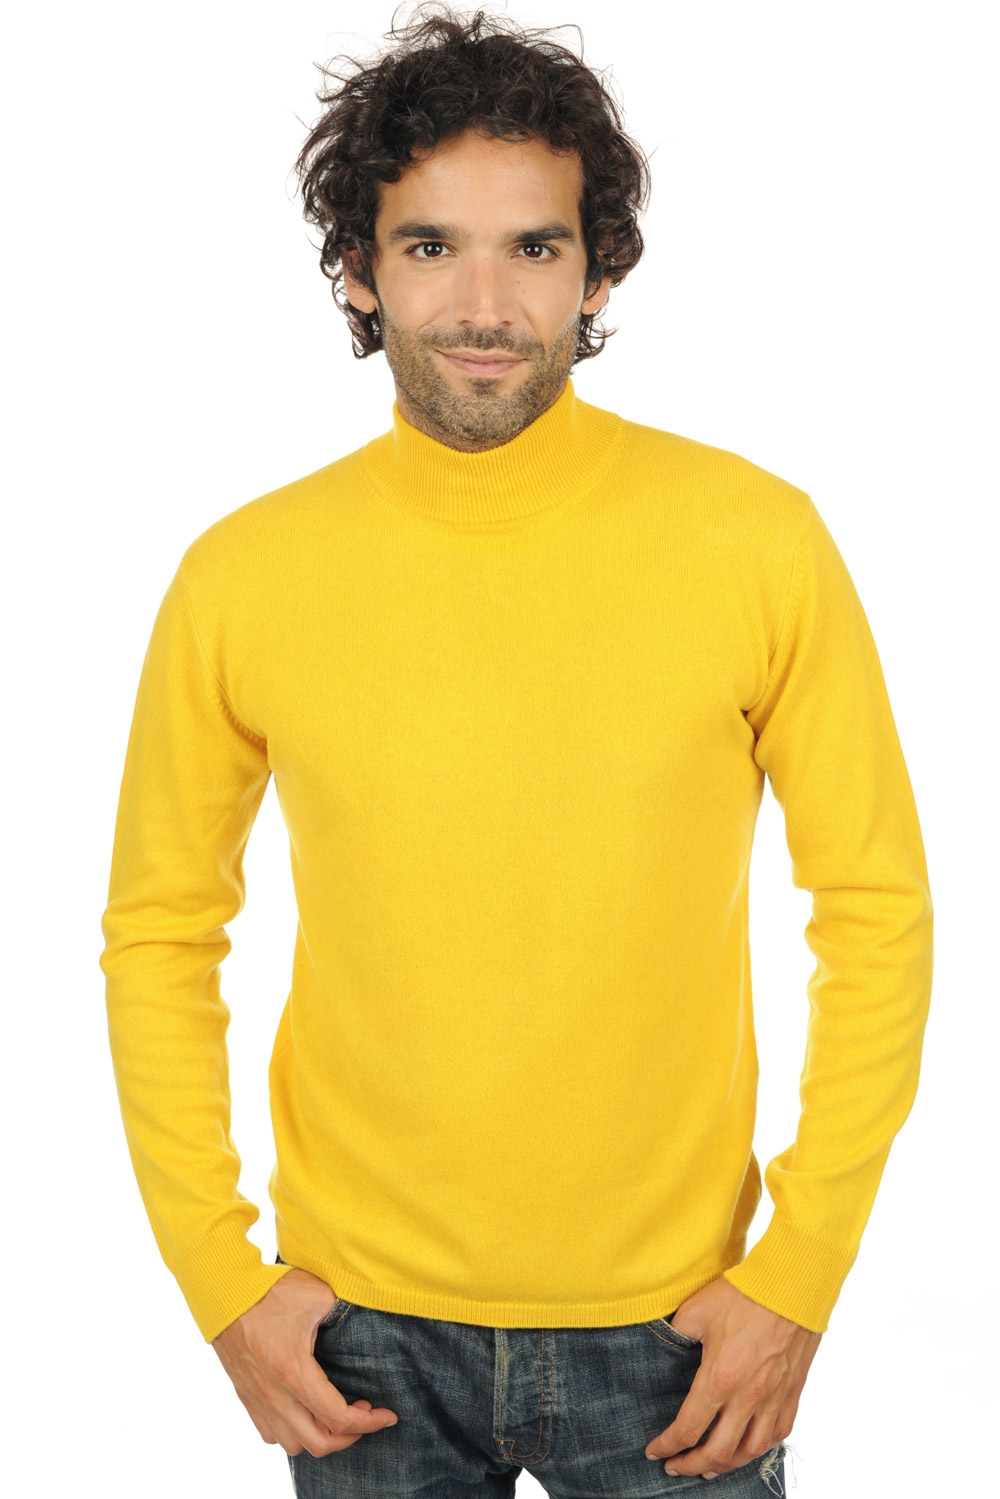 Cashmere men roll neck frederic cyber yellow 3xl